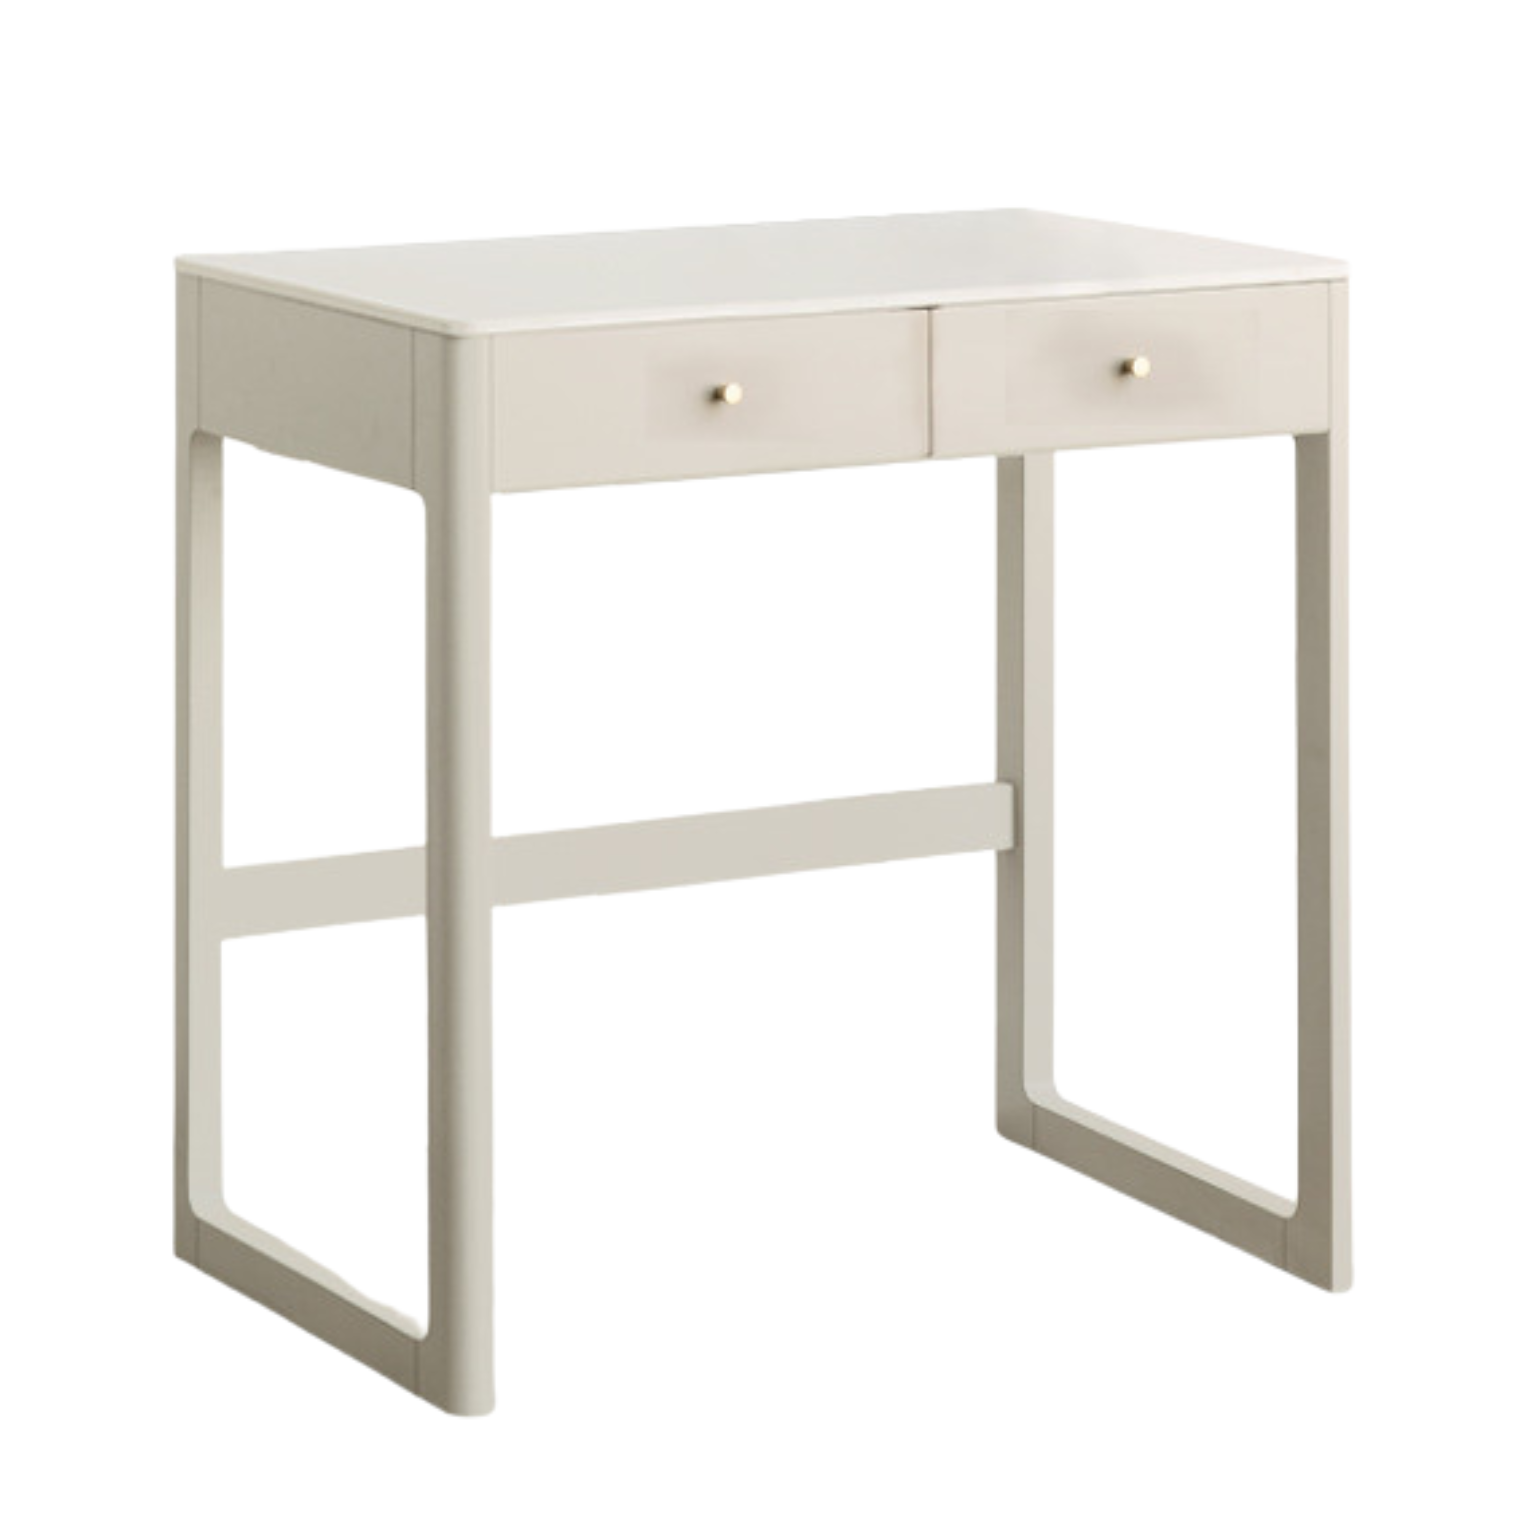 Poplar solid wood Office desk, small dressing table slate top :